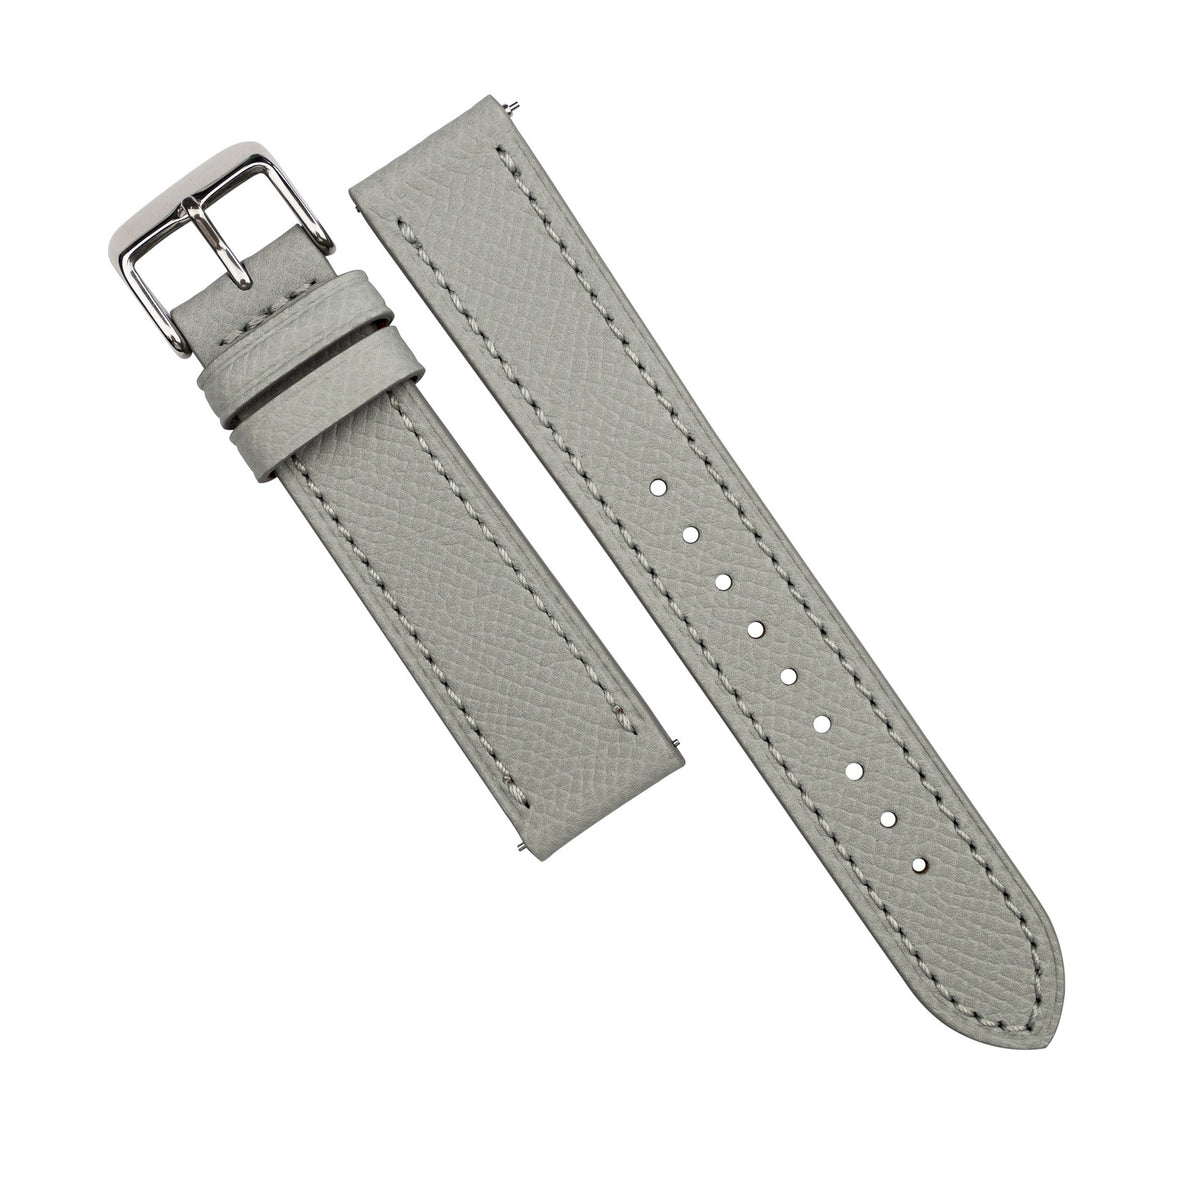 Emery Dress Epsom Leather Strap in Grey (19mm) - Nomad Watch Works SG